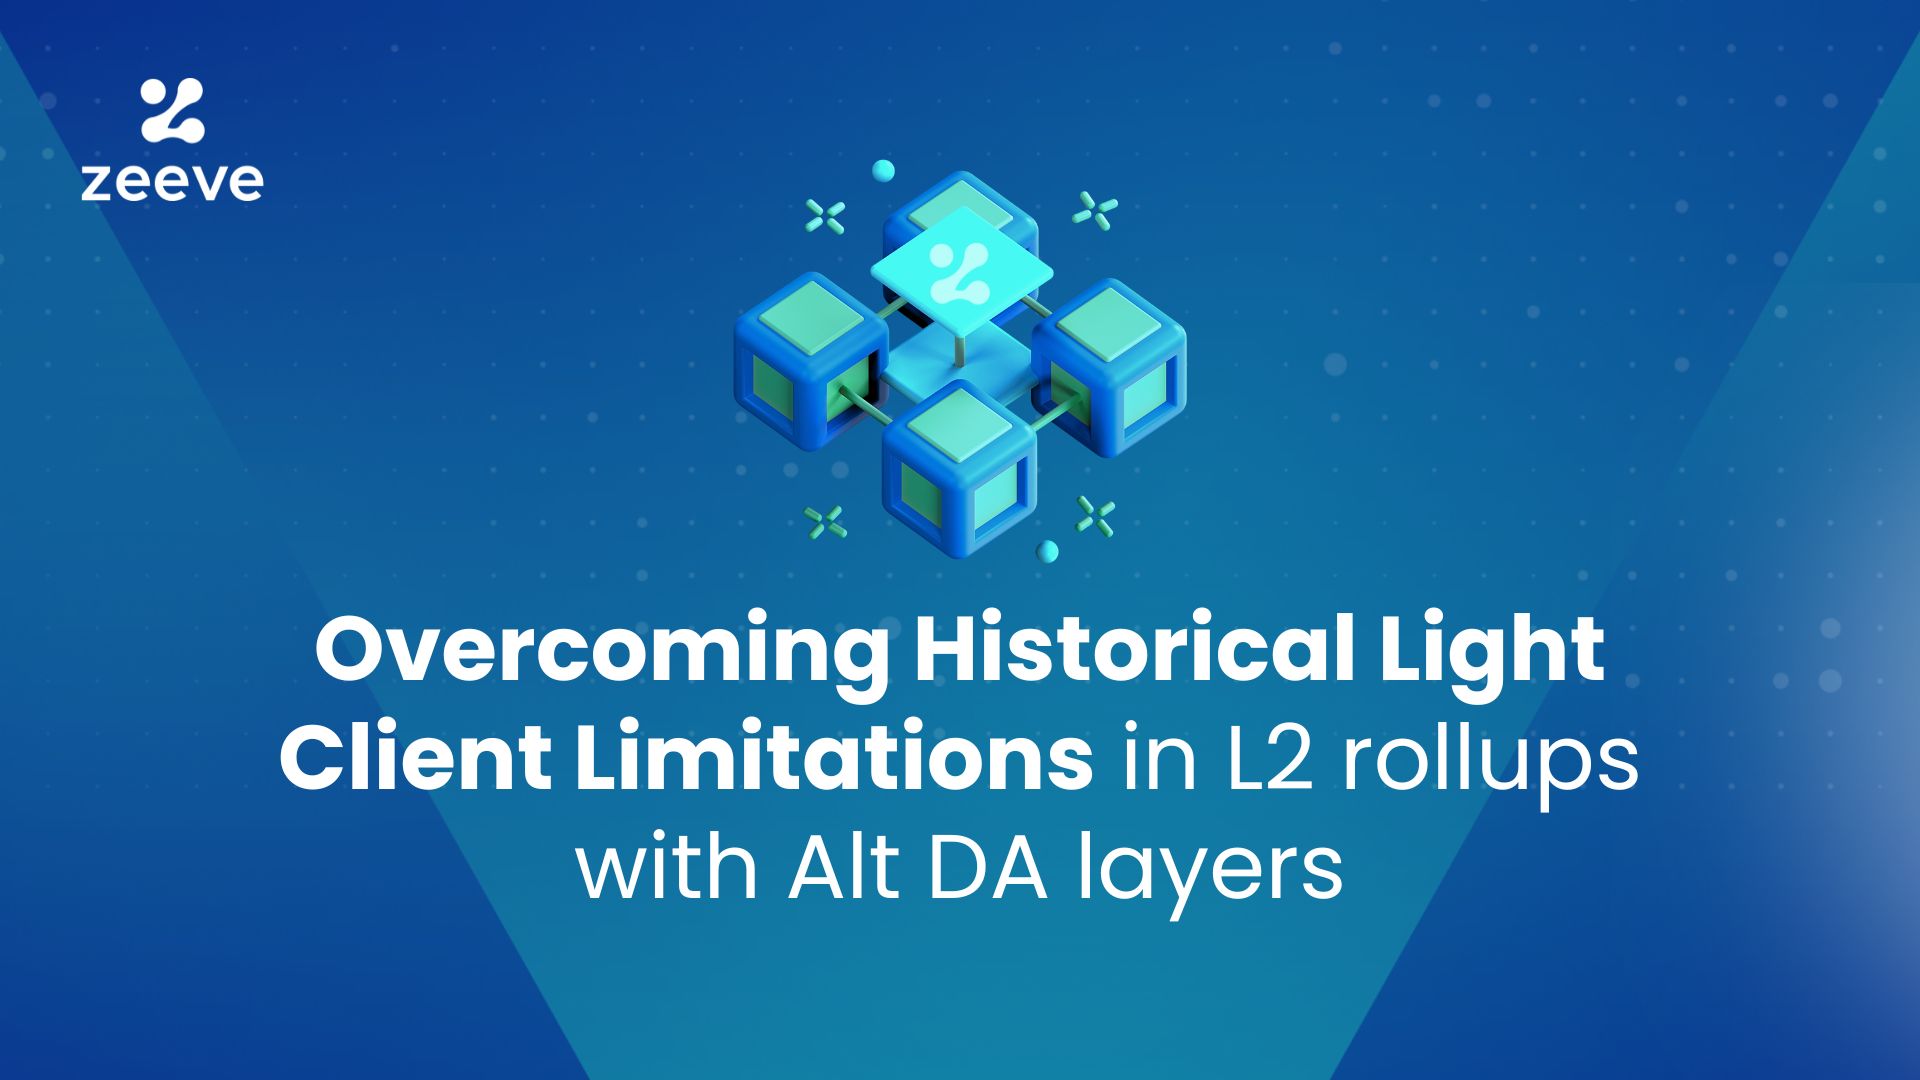 Overcoming Historical Light Client Limitations in L2 rollups with Alt DA layers